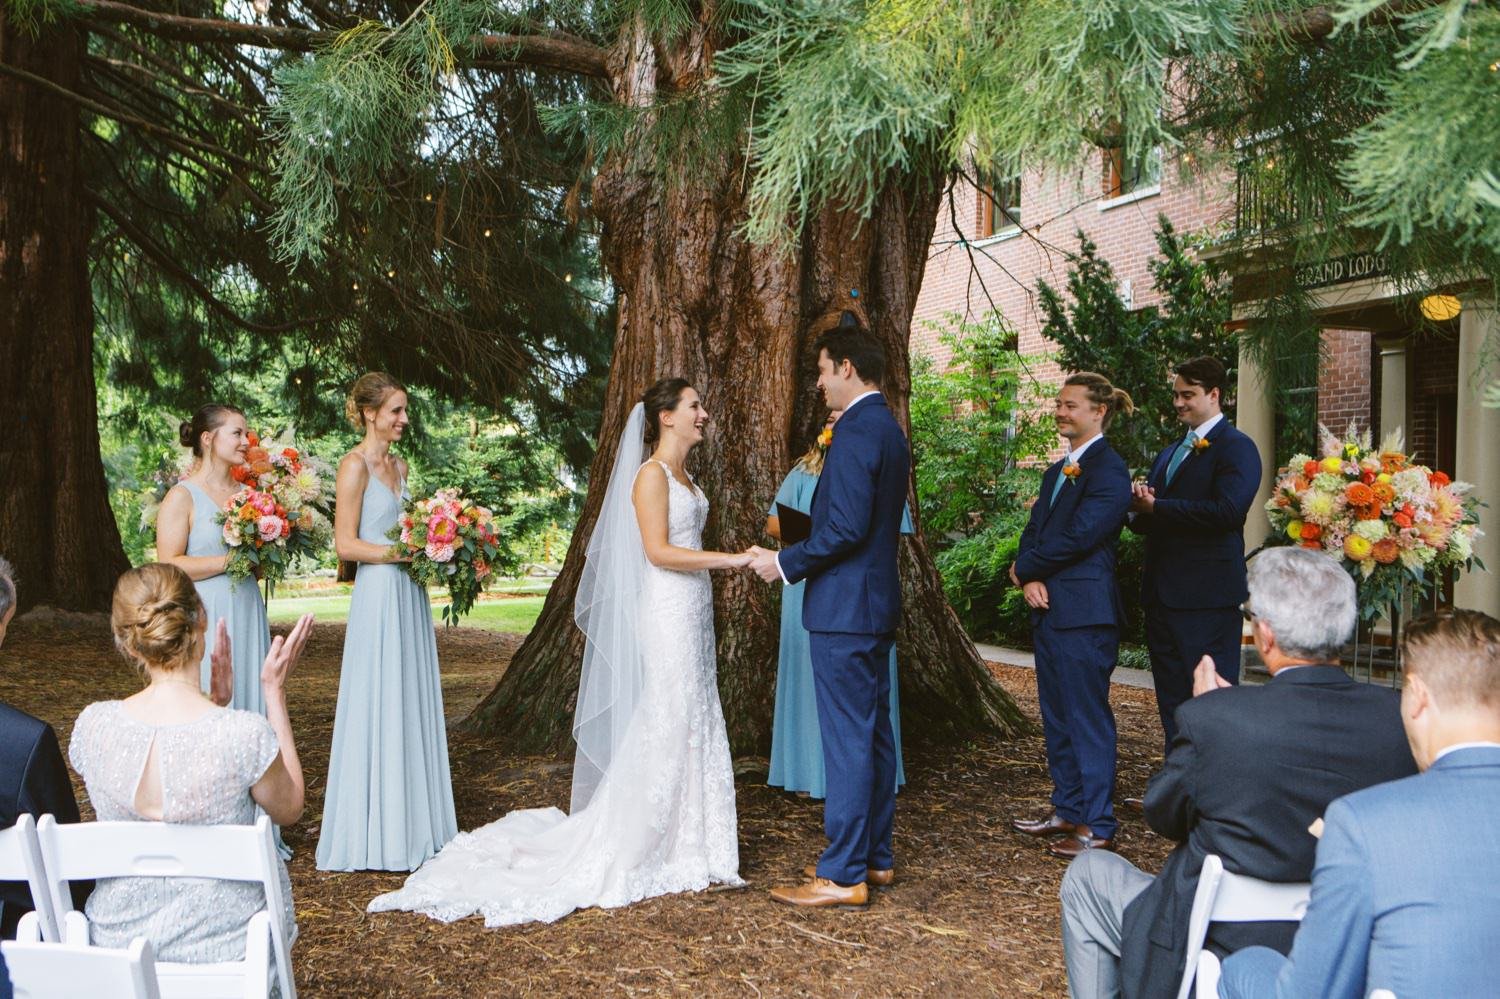  bride in white dress and bridesmaids in light blue dresses stand next to groom and two groomsmen in navy suits during wedding ceremony at mcmenamins grand lodge 